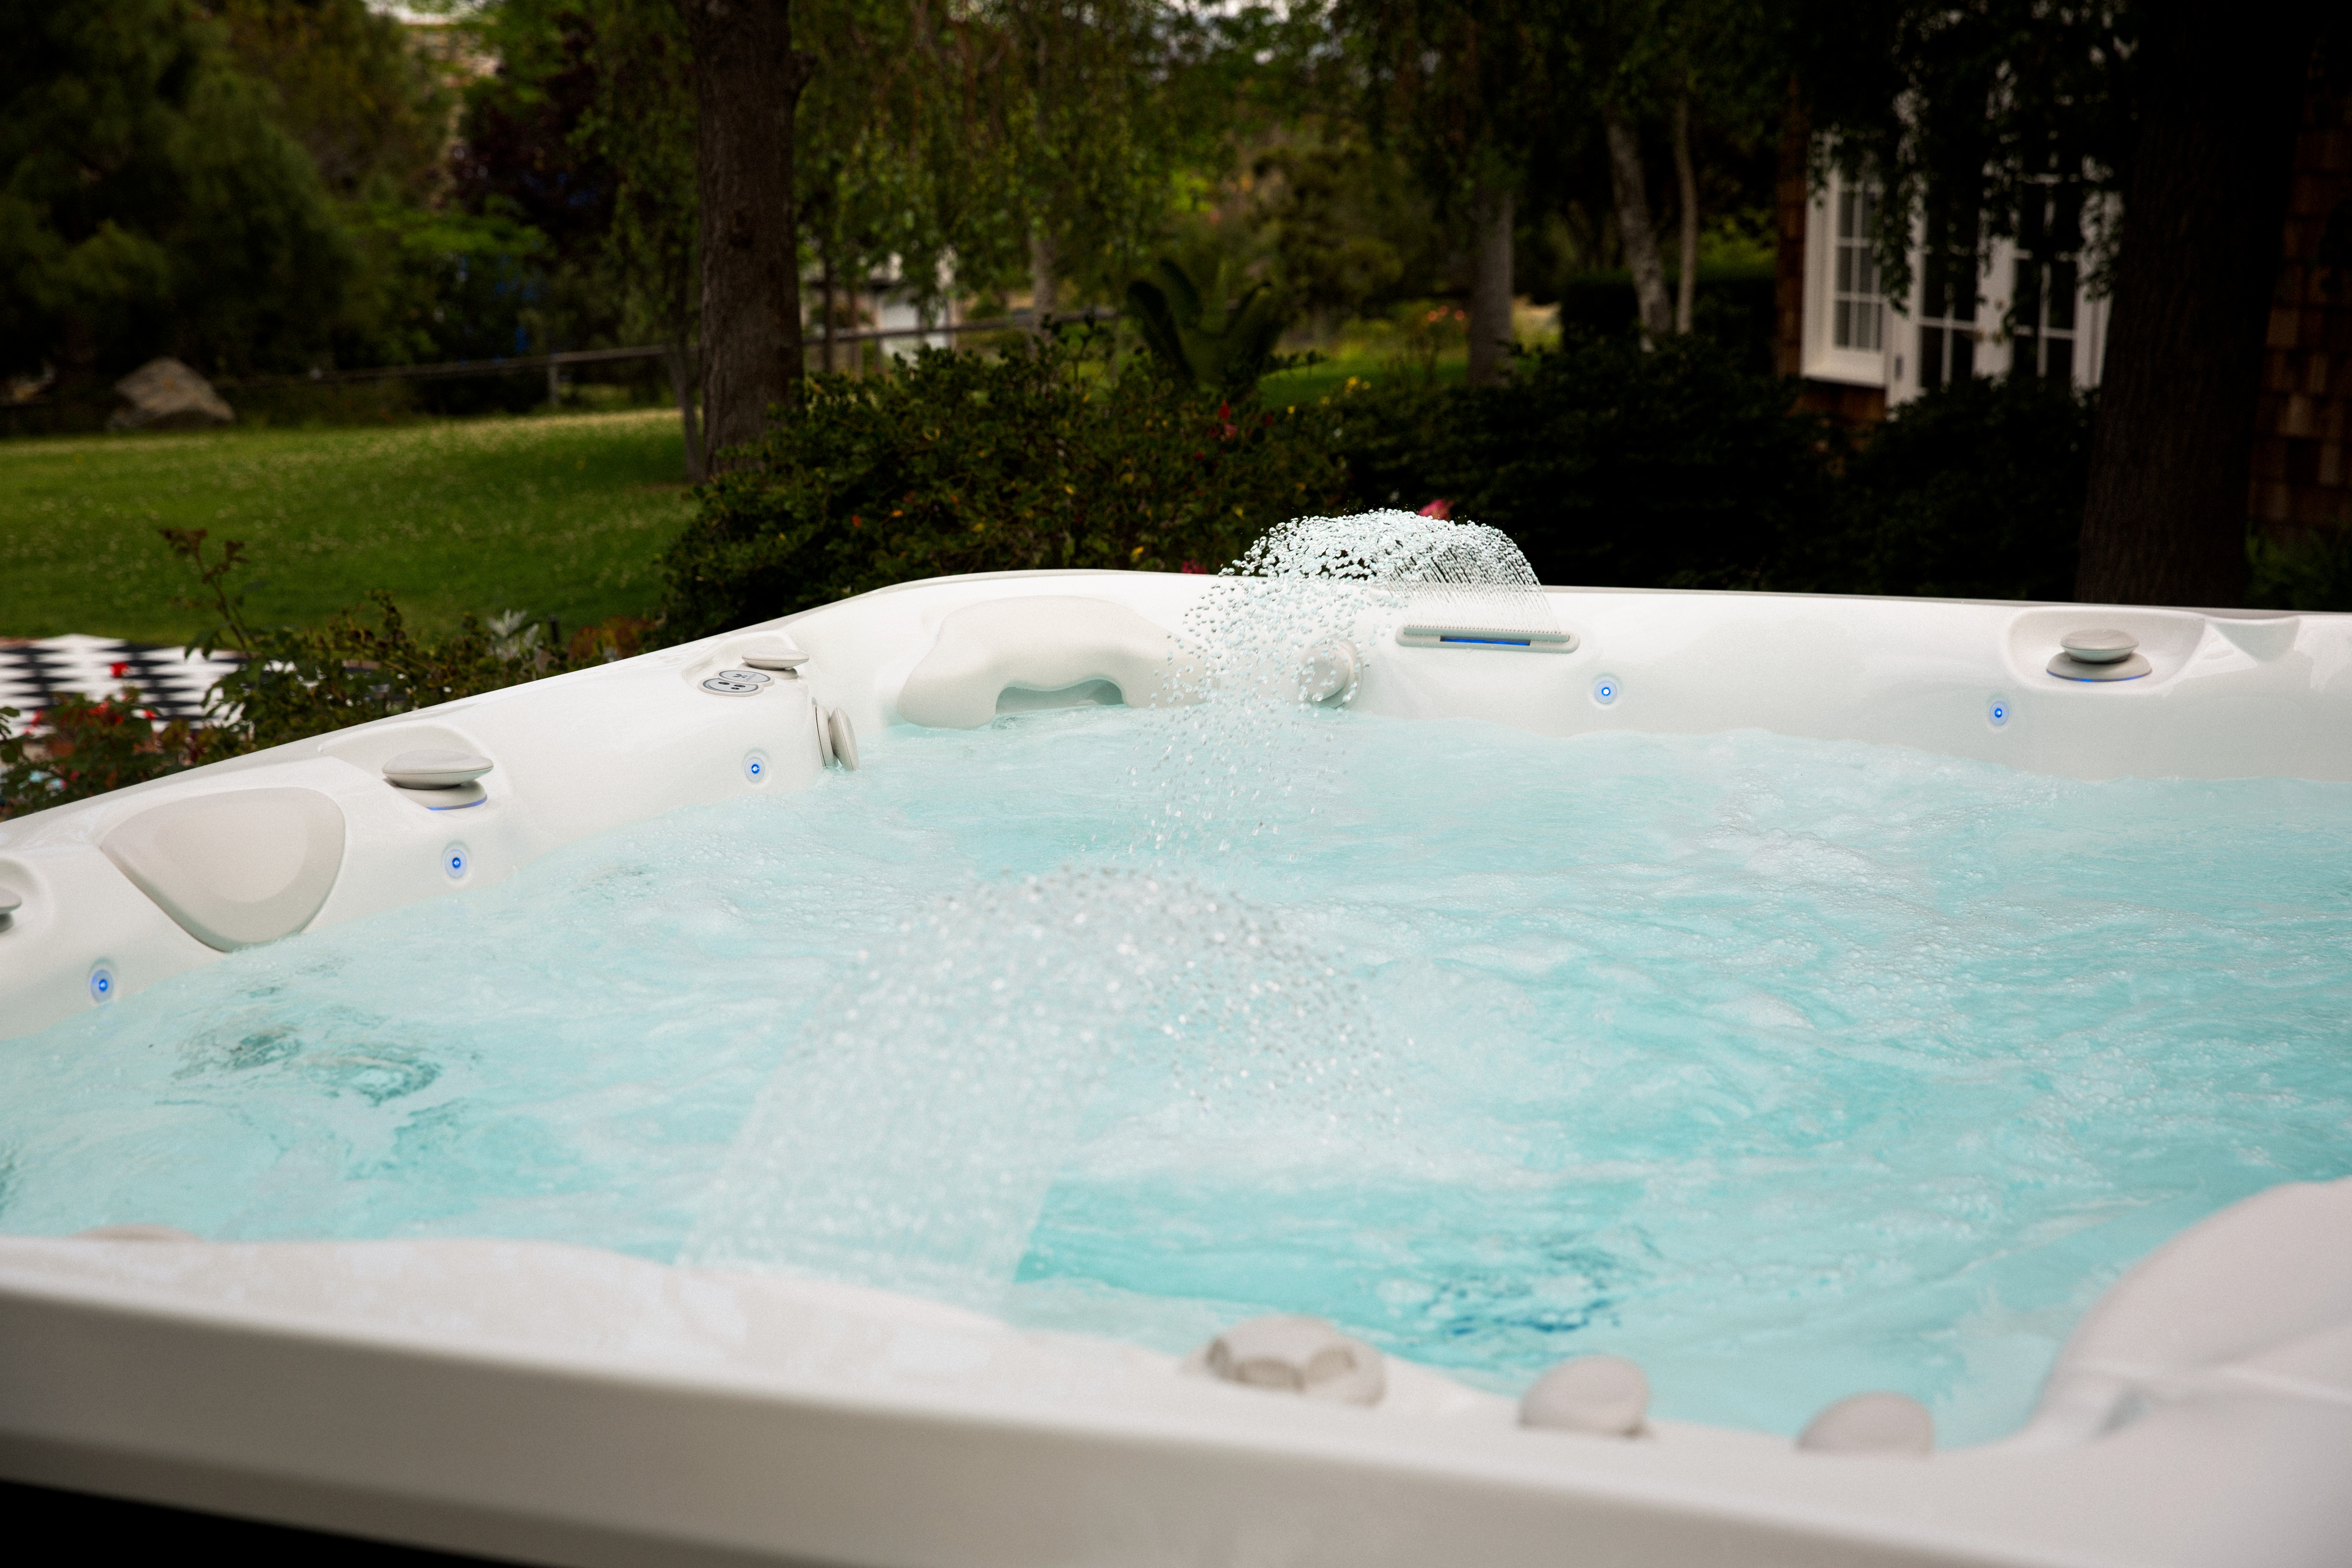 If hot tub pump troubleshooting doesn’t fix your spa, call a service representative for assistance.